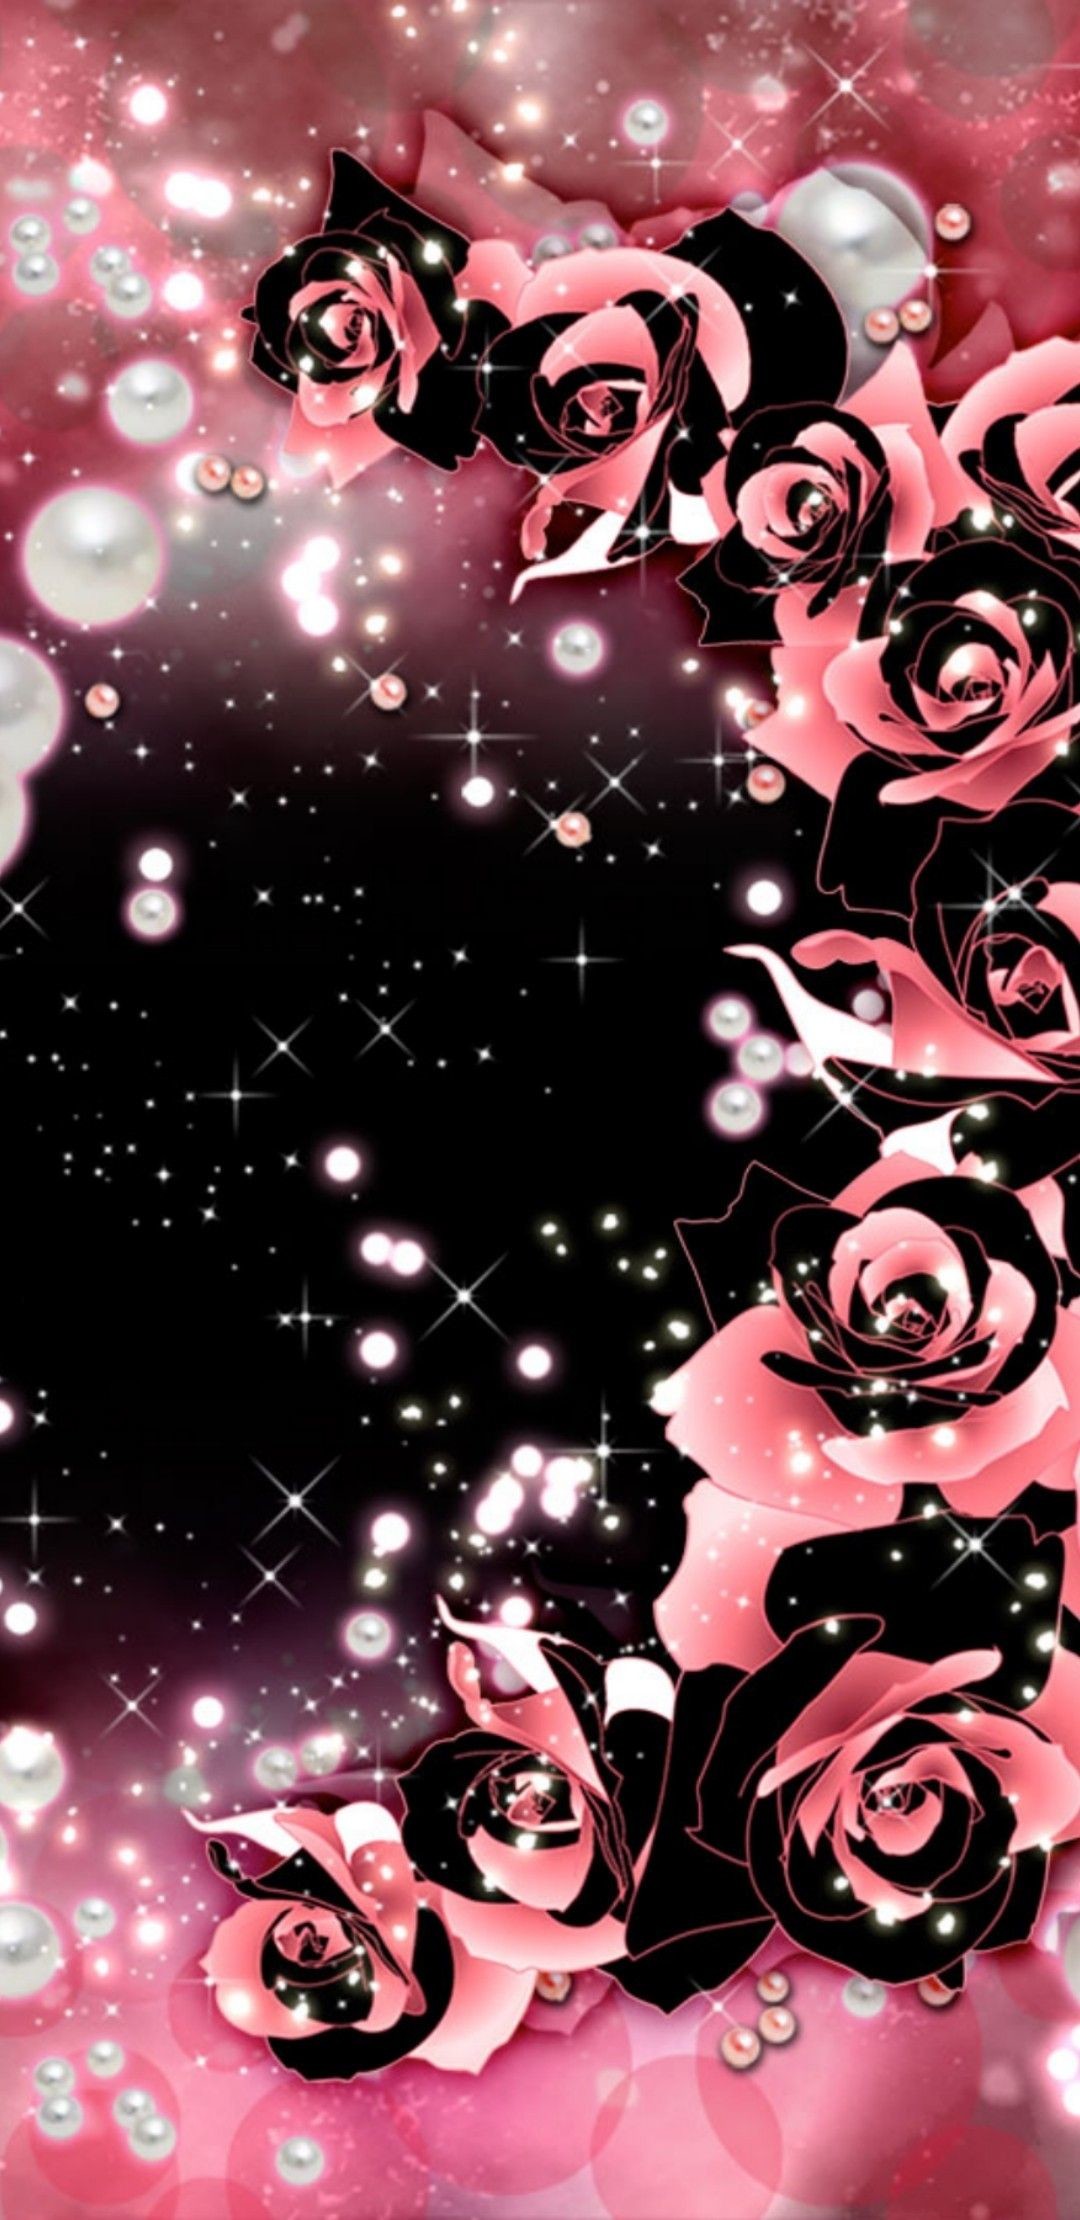 1080x2220 Pink and black roses Pink And Black Wallpaper, Pink Wallpaper Iphone, Rose  Wallpaper,